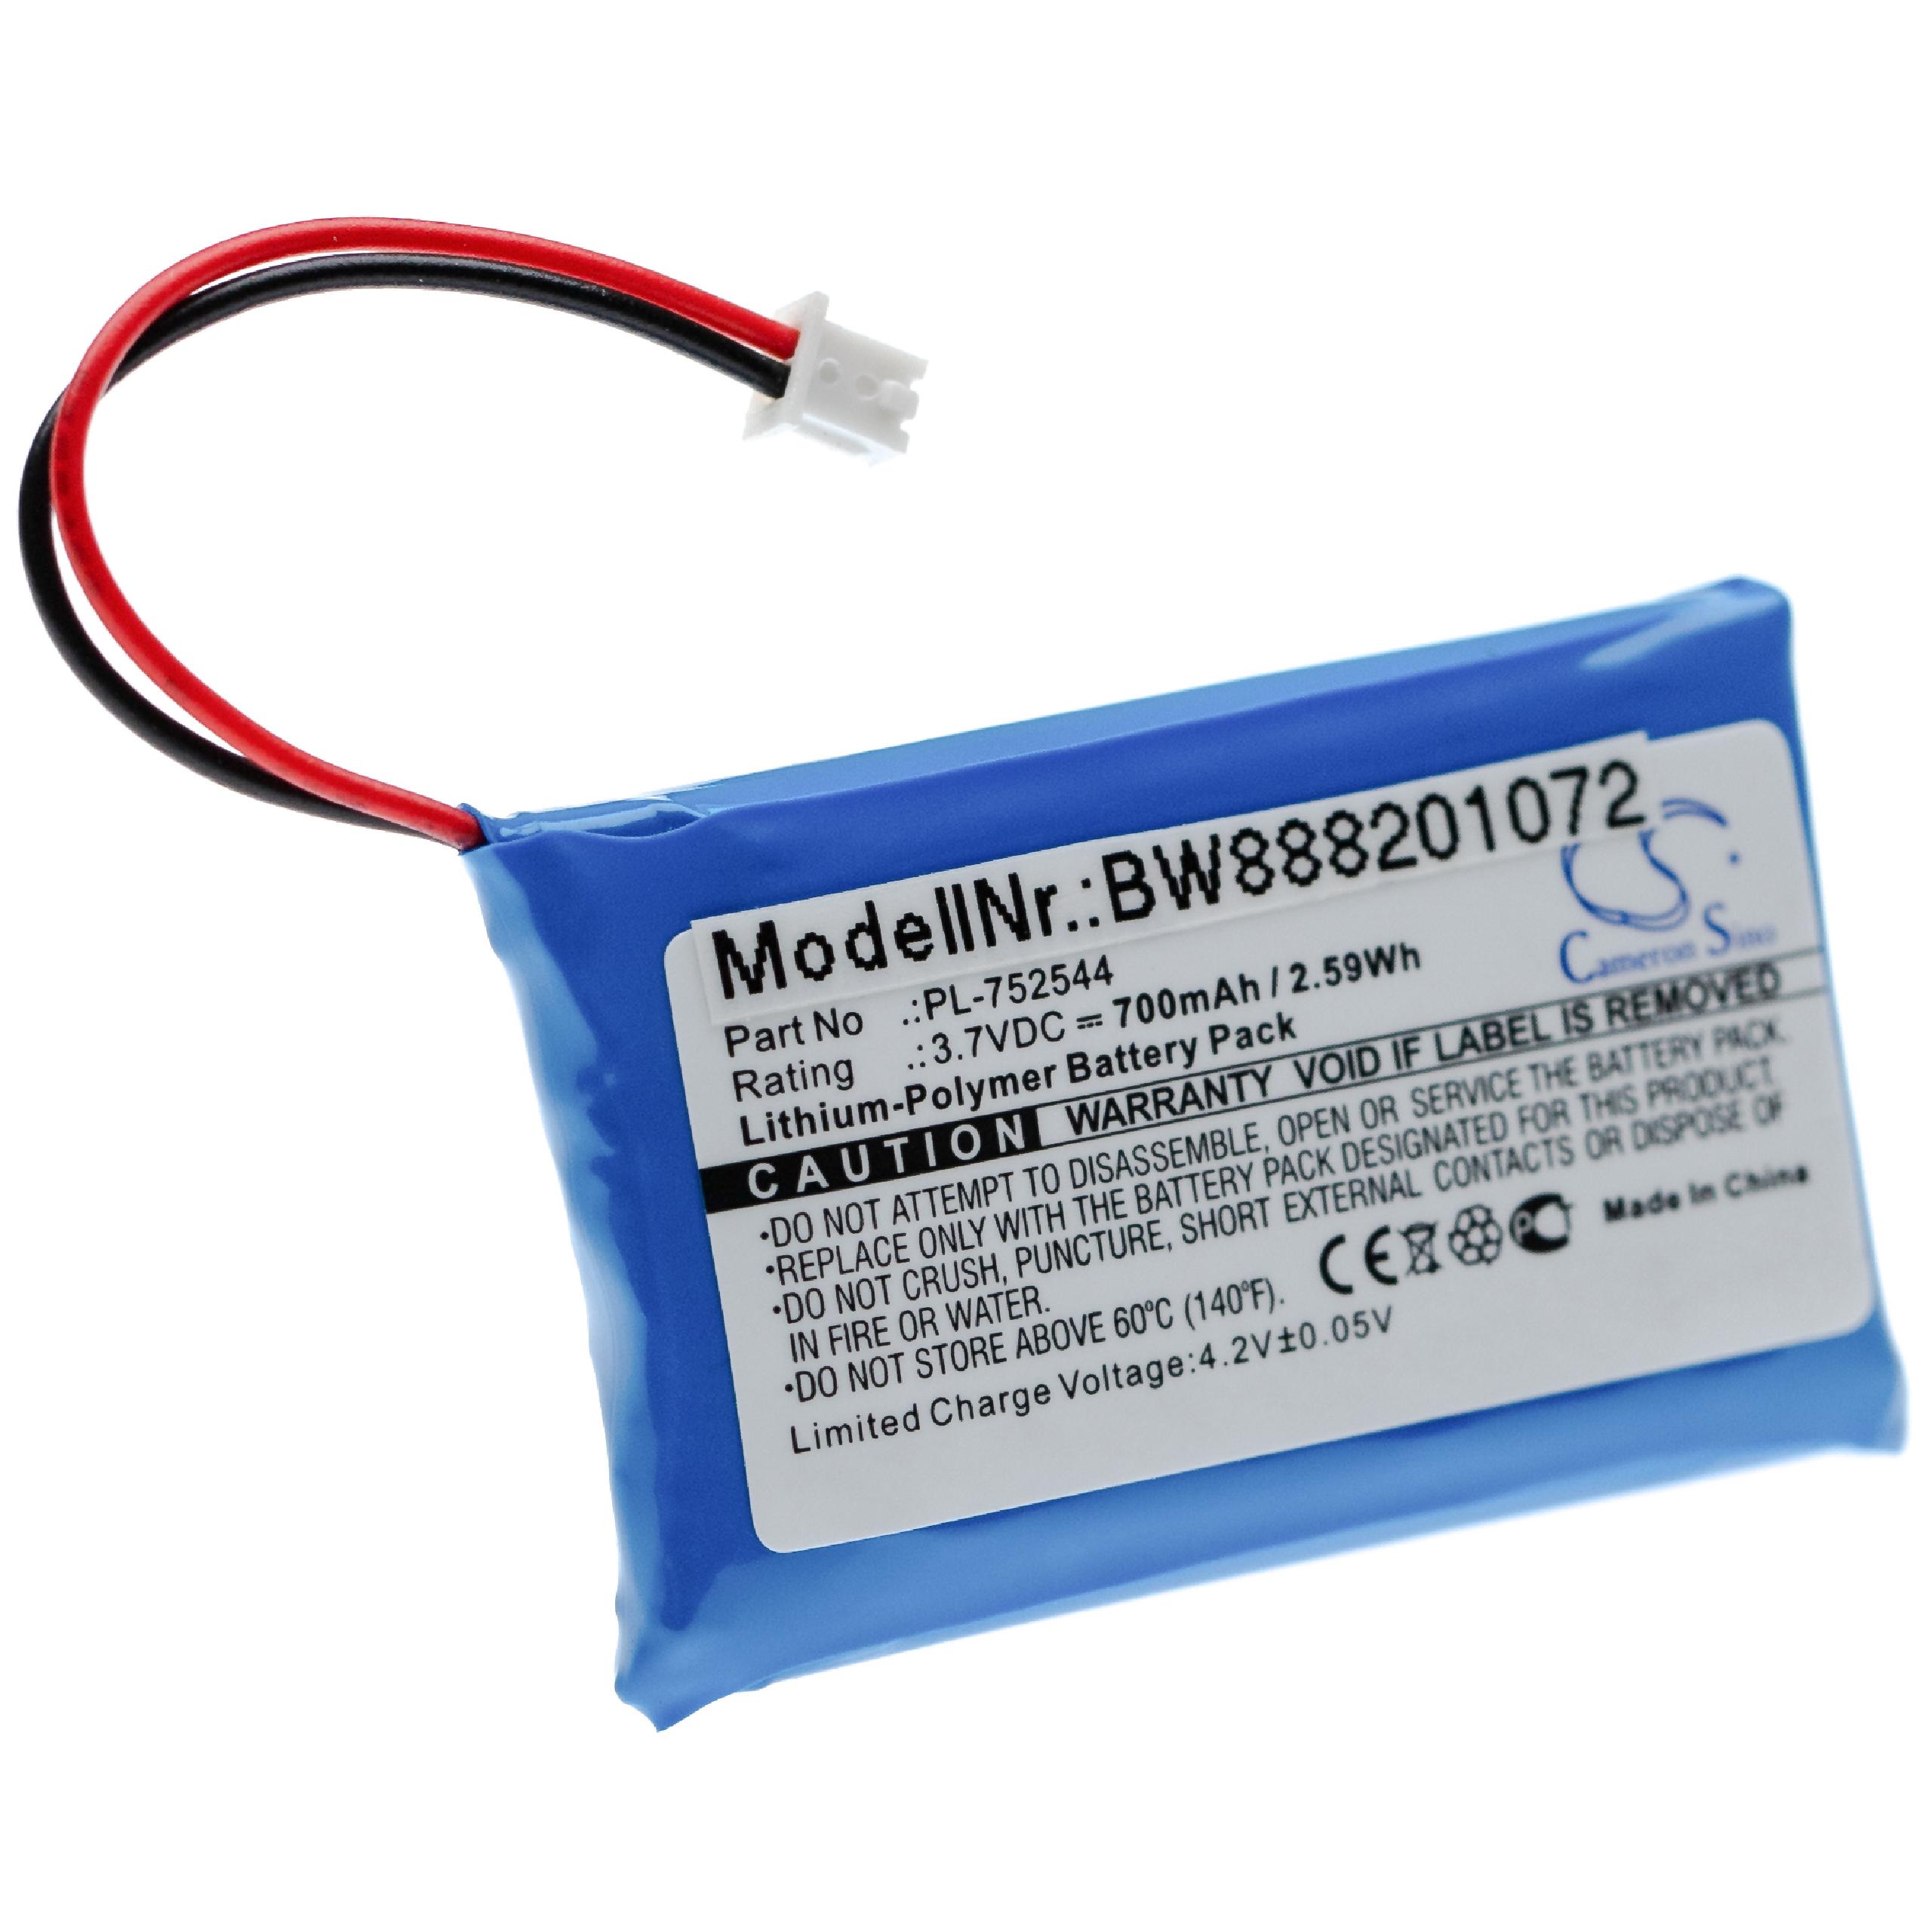 Dog Trainer Battery Replacement for Educator PL-752544 - 700mAh 3.7V Li-polymer